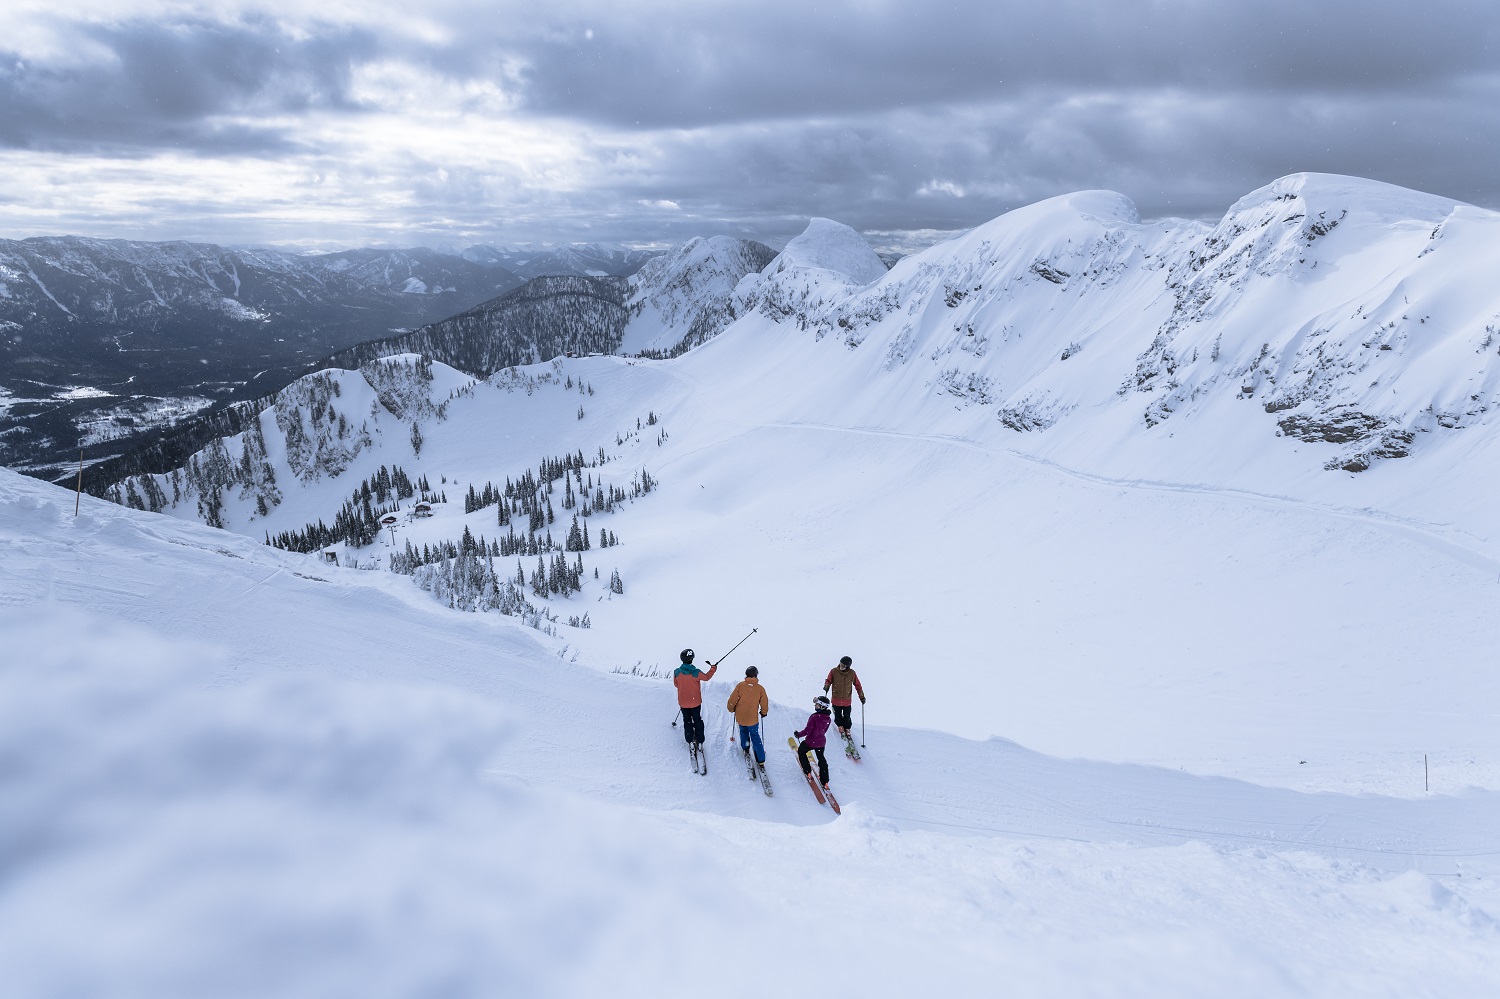 A group of skiers asses a snow covered ridge in the alpine